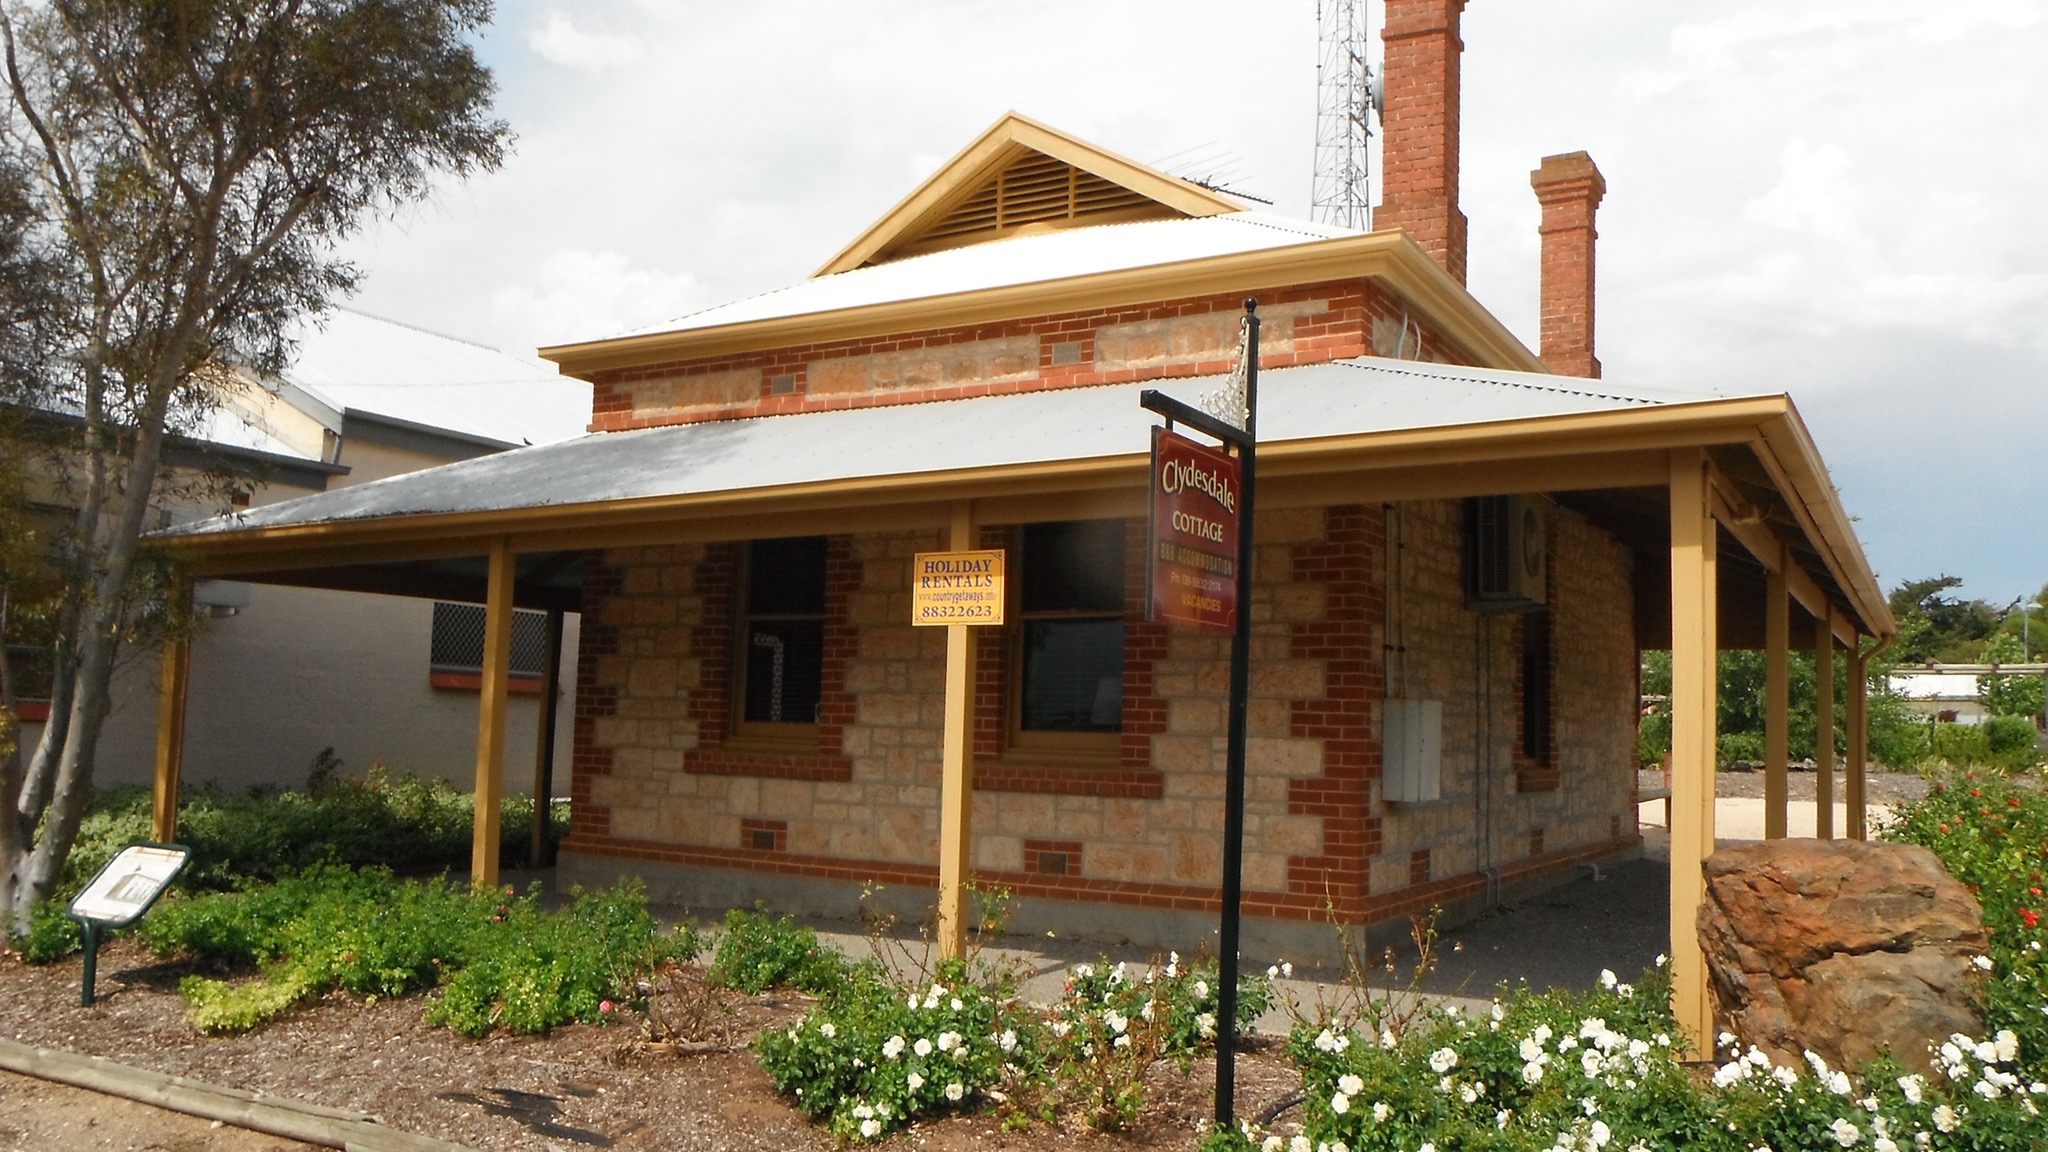 Clydesdale Cottage Bed & Breakfast - Accommodation in Bendigo 0